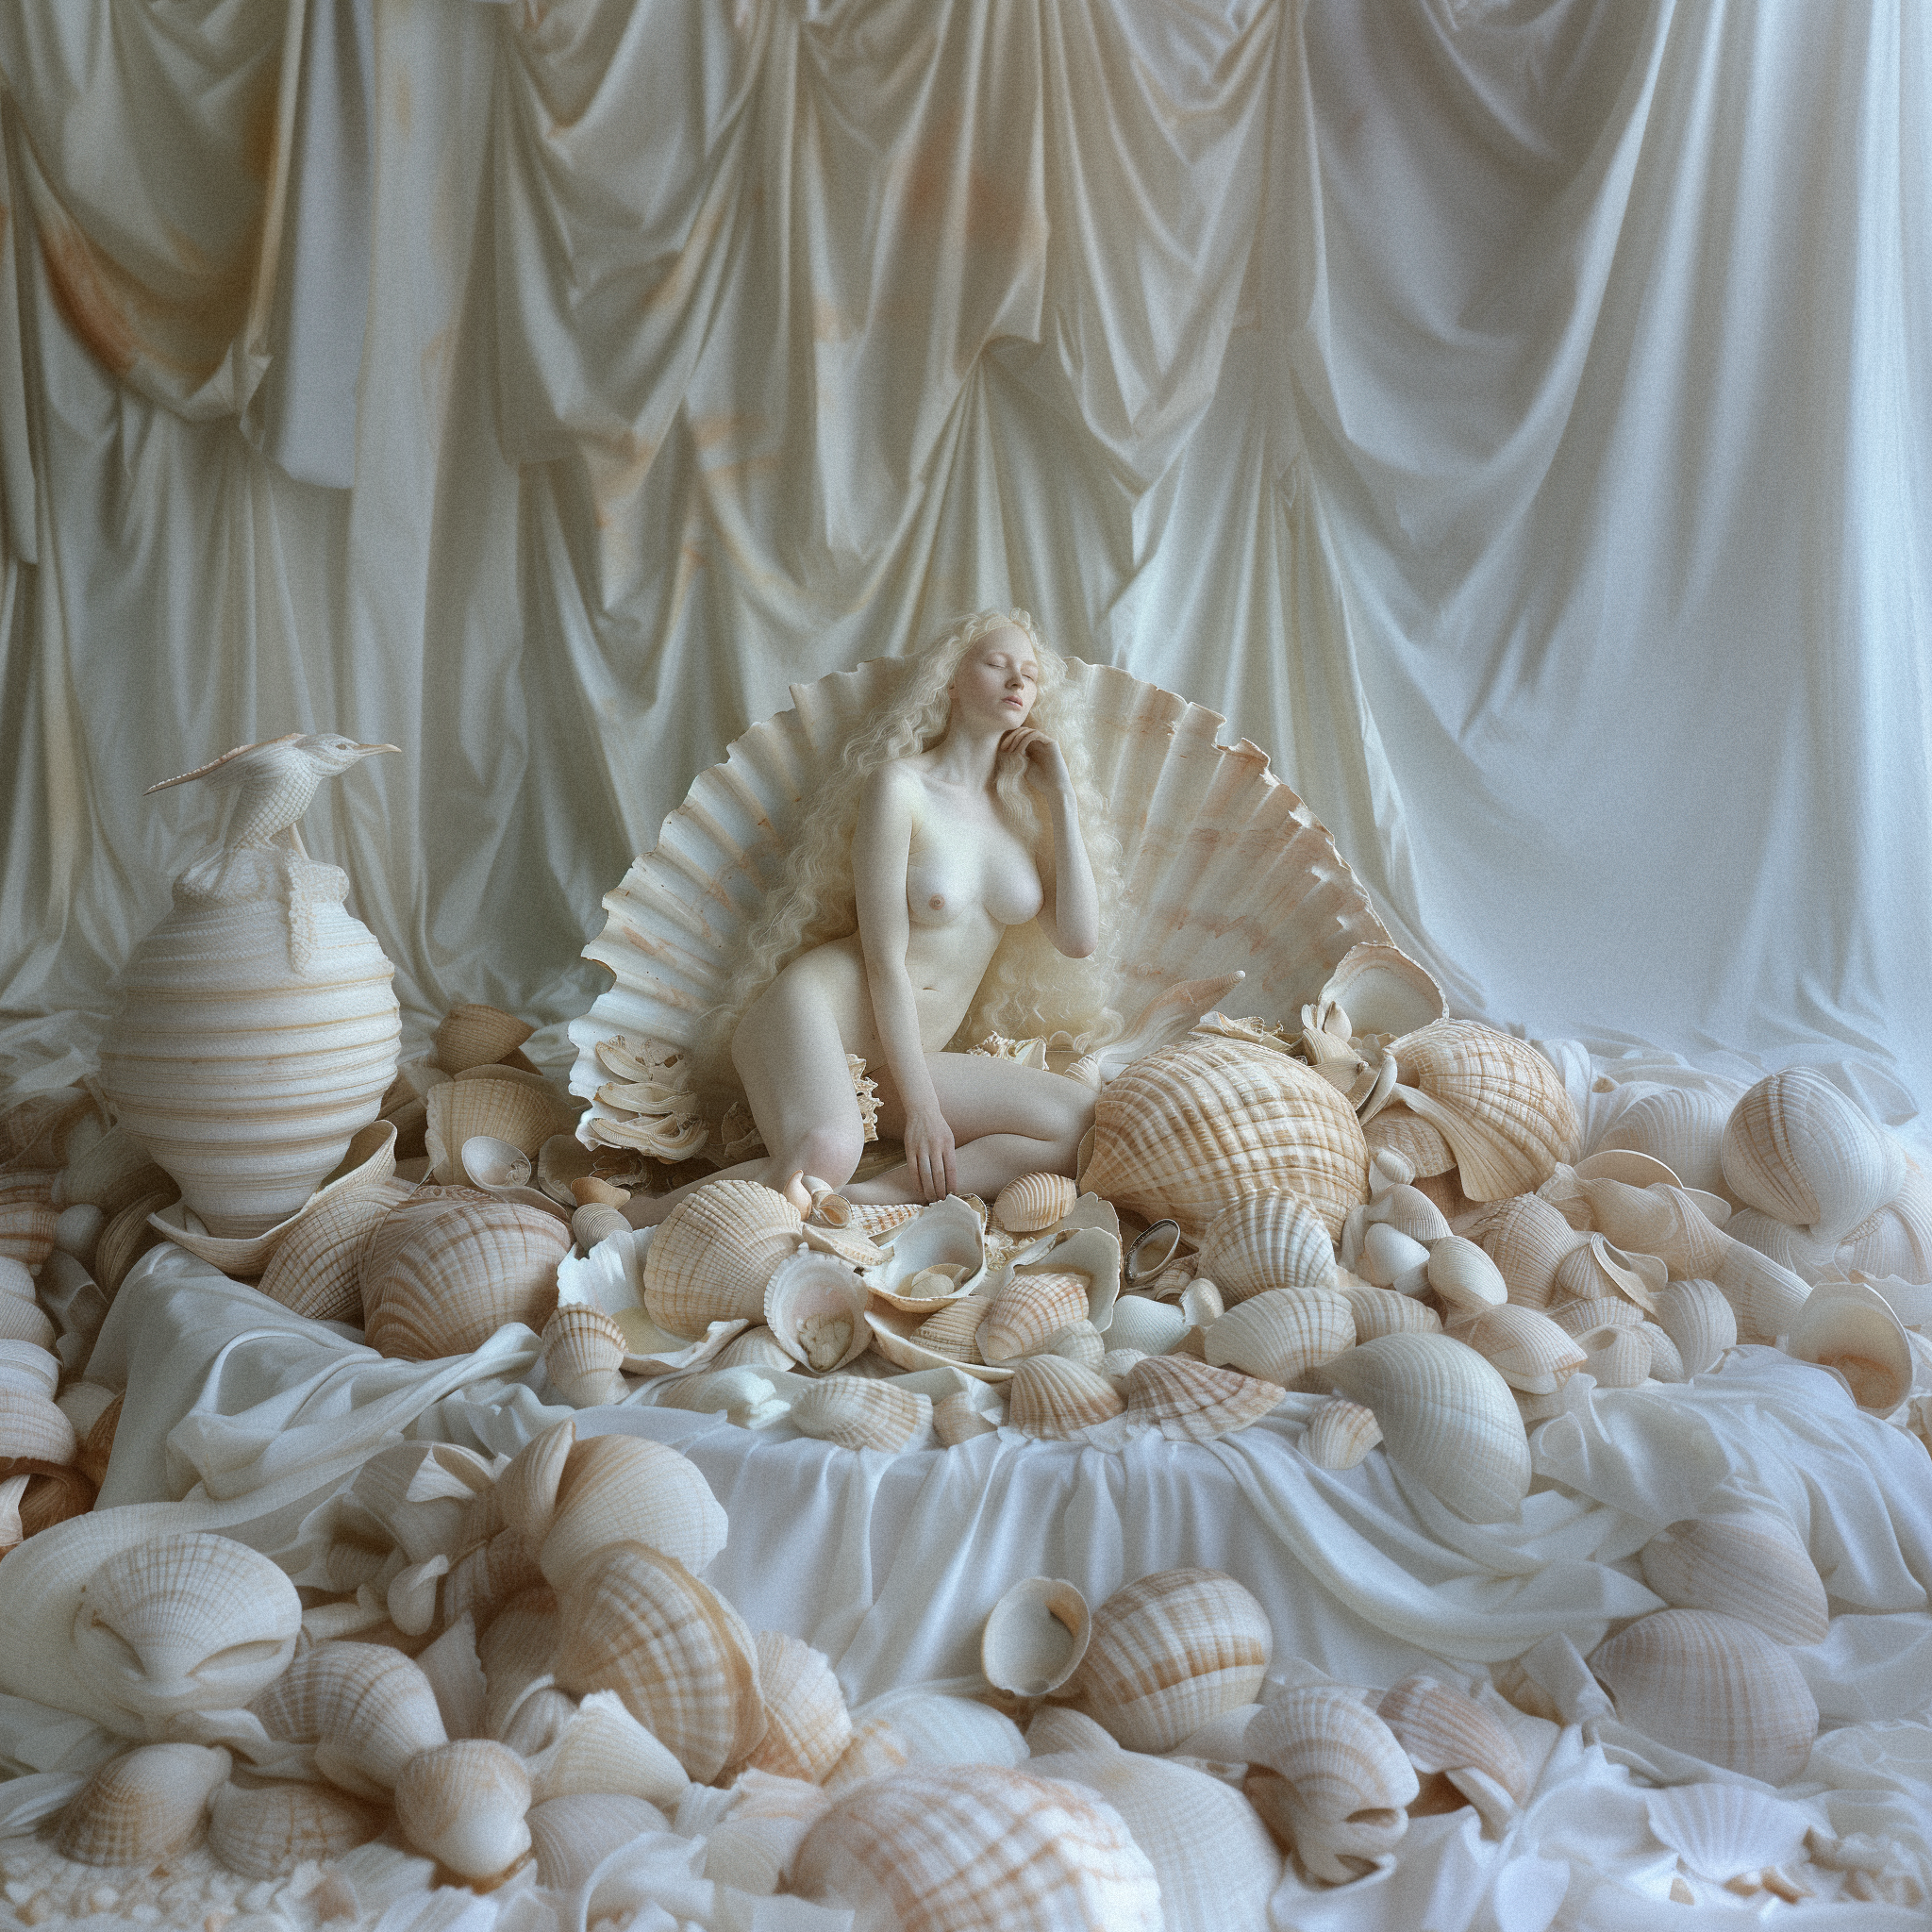 maeganm_birth_of_venus_in_the_style_of_tim_walker_5d2fa3d3-5f75-429d-828c-bc4c2e59927c.png